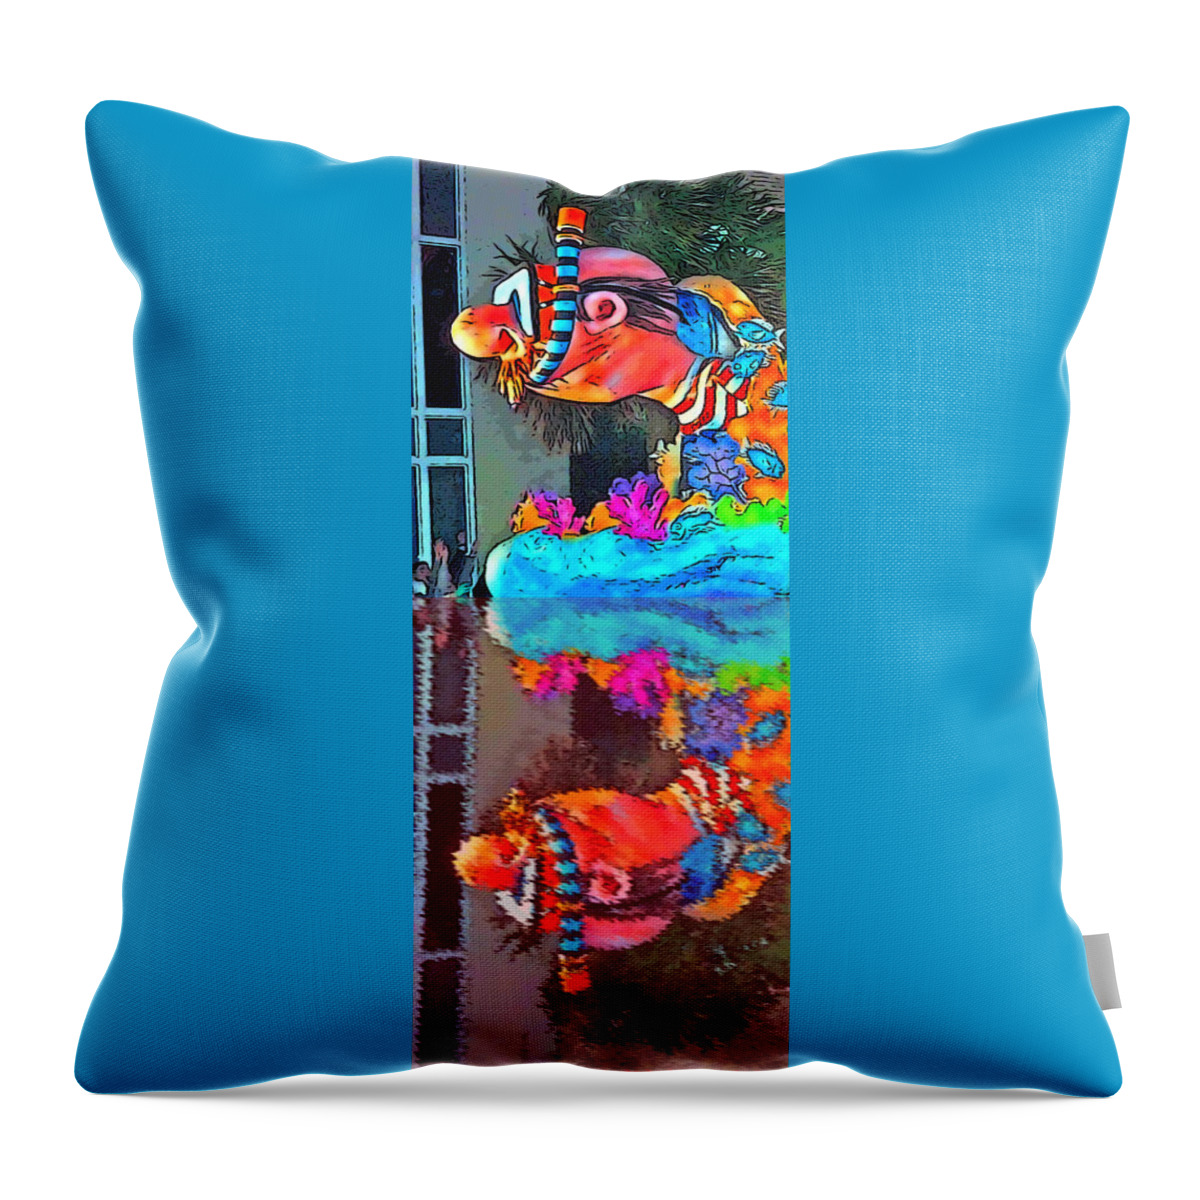 Digital Art Throw Pillow featuring the photograph Diver's Reflection by Marian Bell